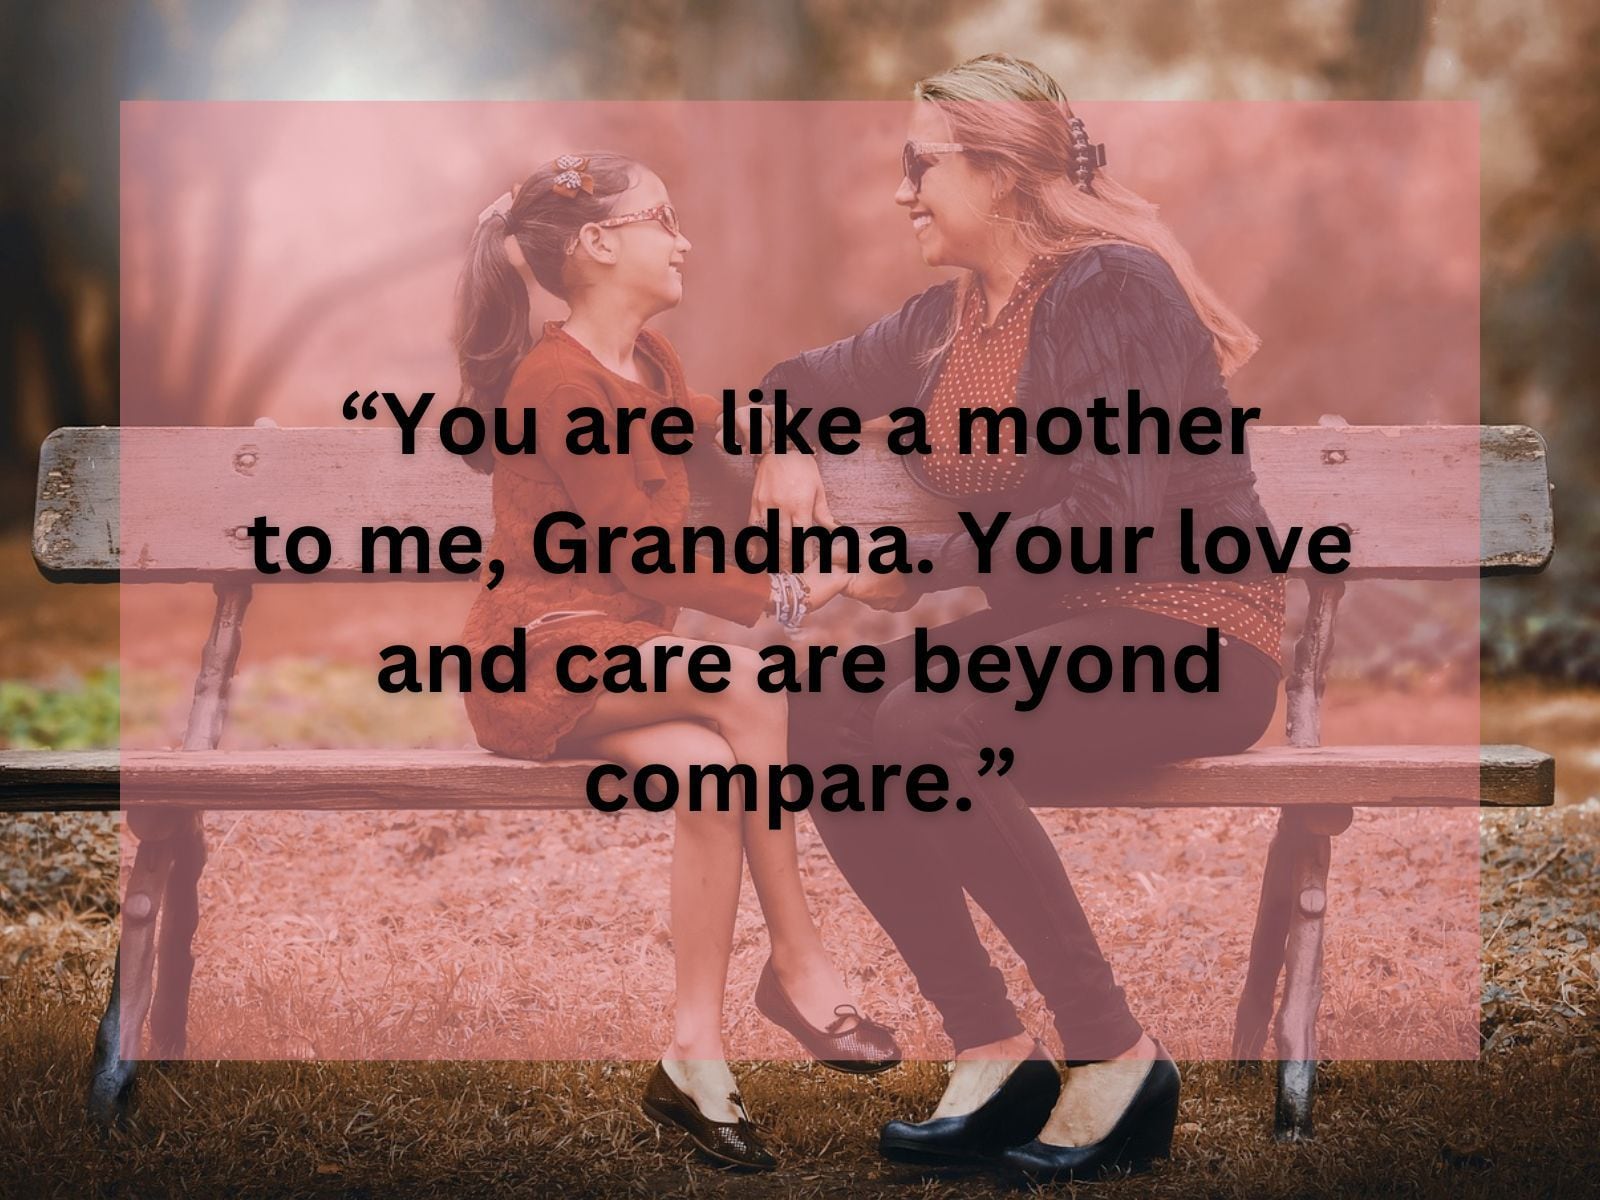 100 Heartfelt Mother’s Day Quotes that capture the essence of motherhood